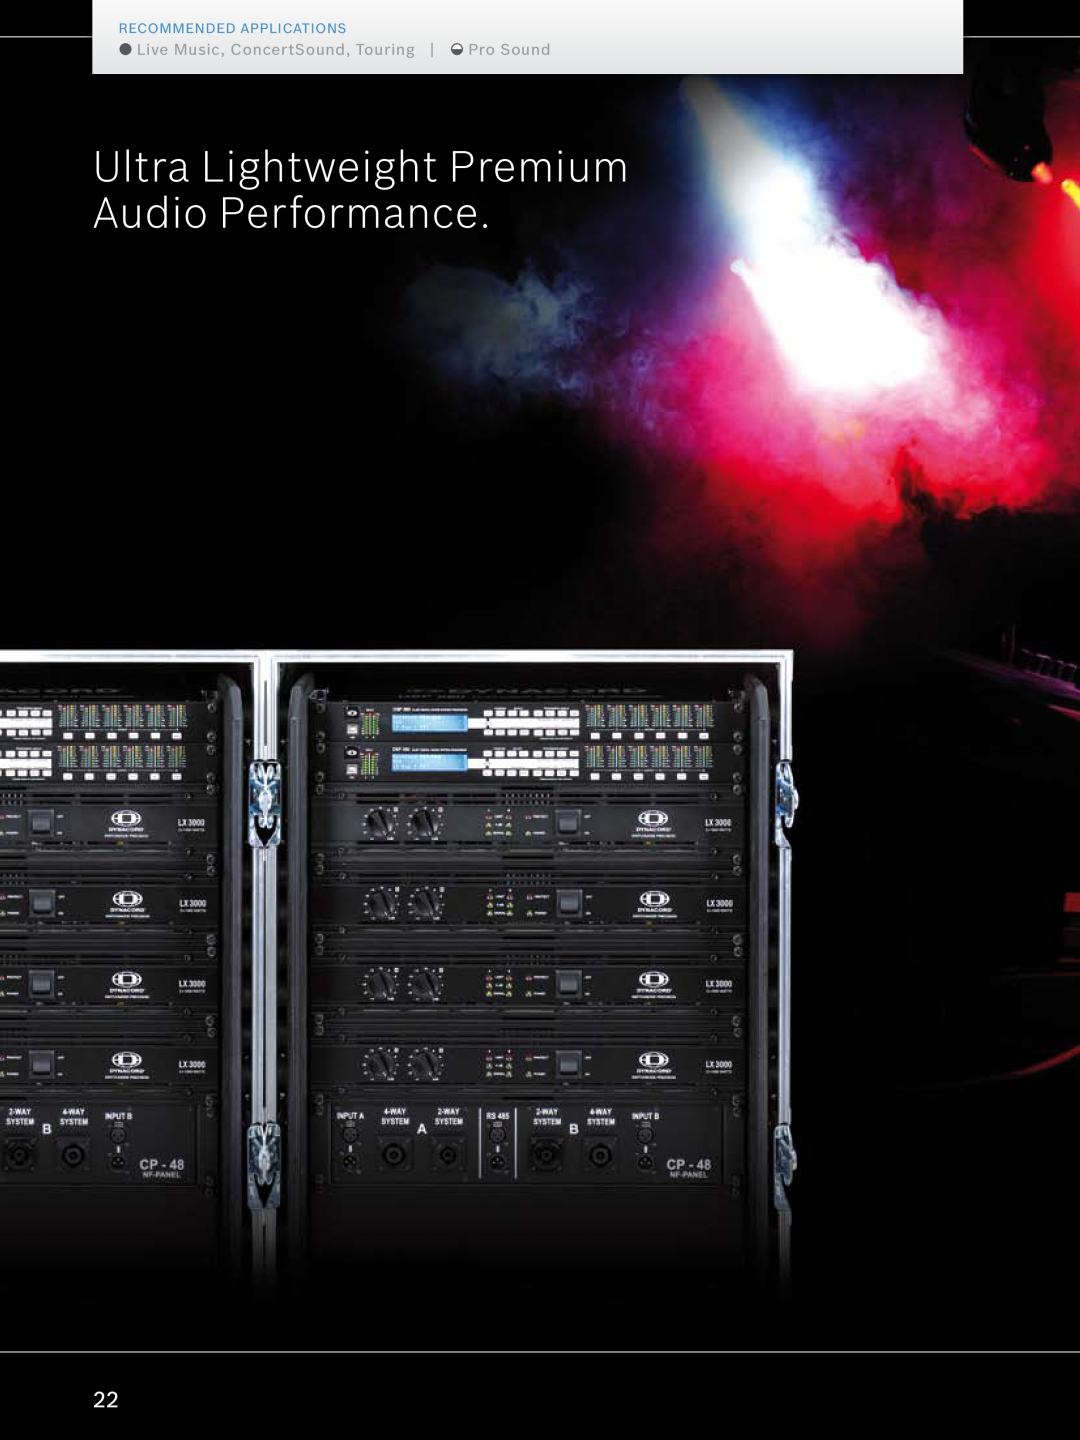 Dynacord Professional Power Amplifiers Ultra Lightweight Premium Audio Performance, Live Music, ConcertSound, Touring 